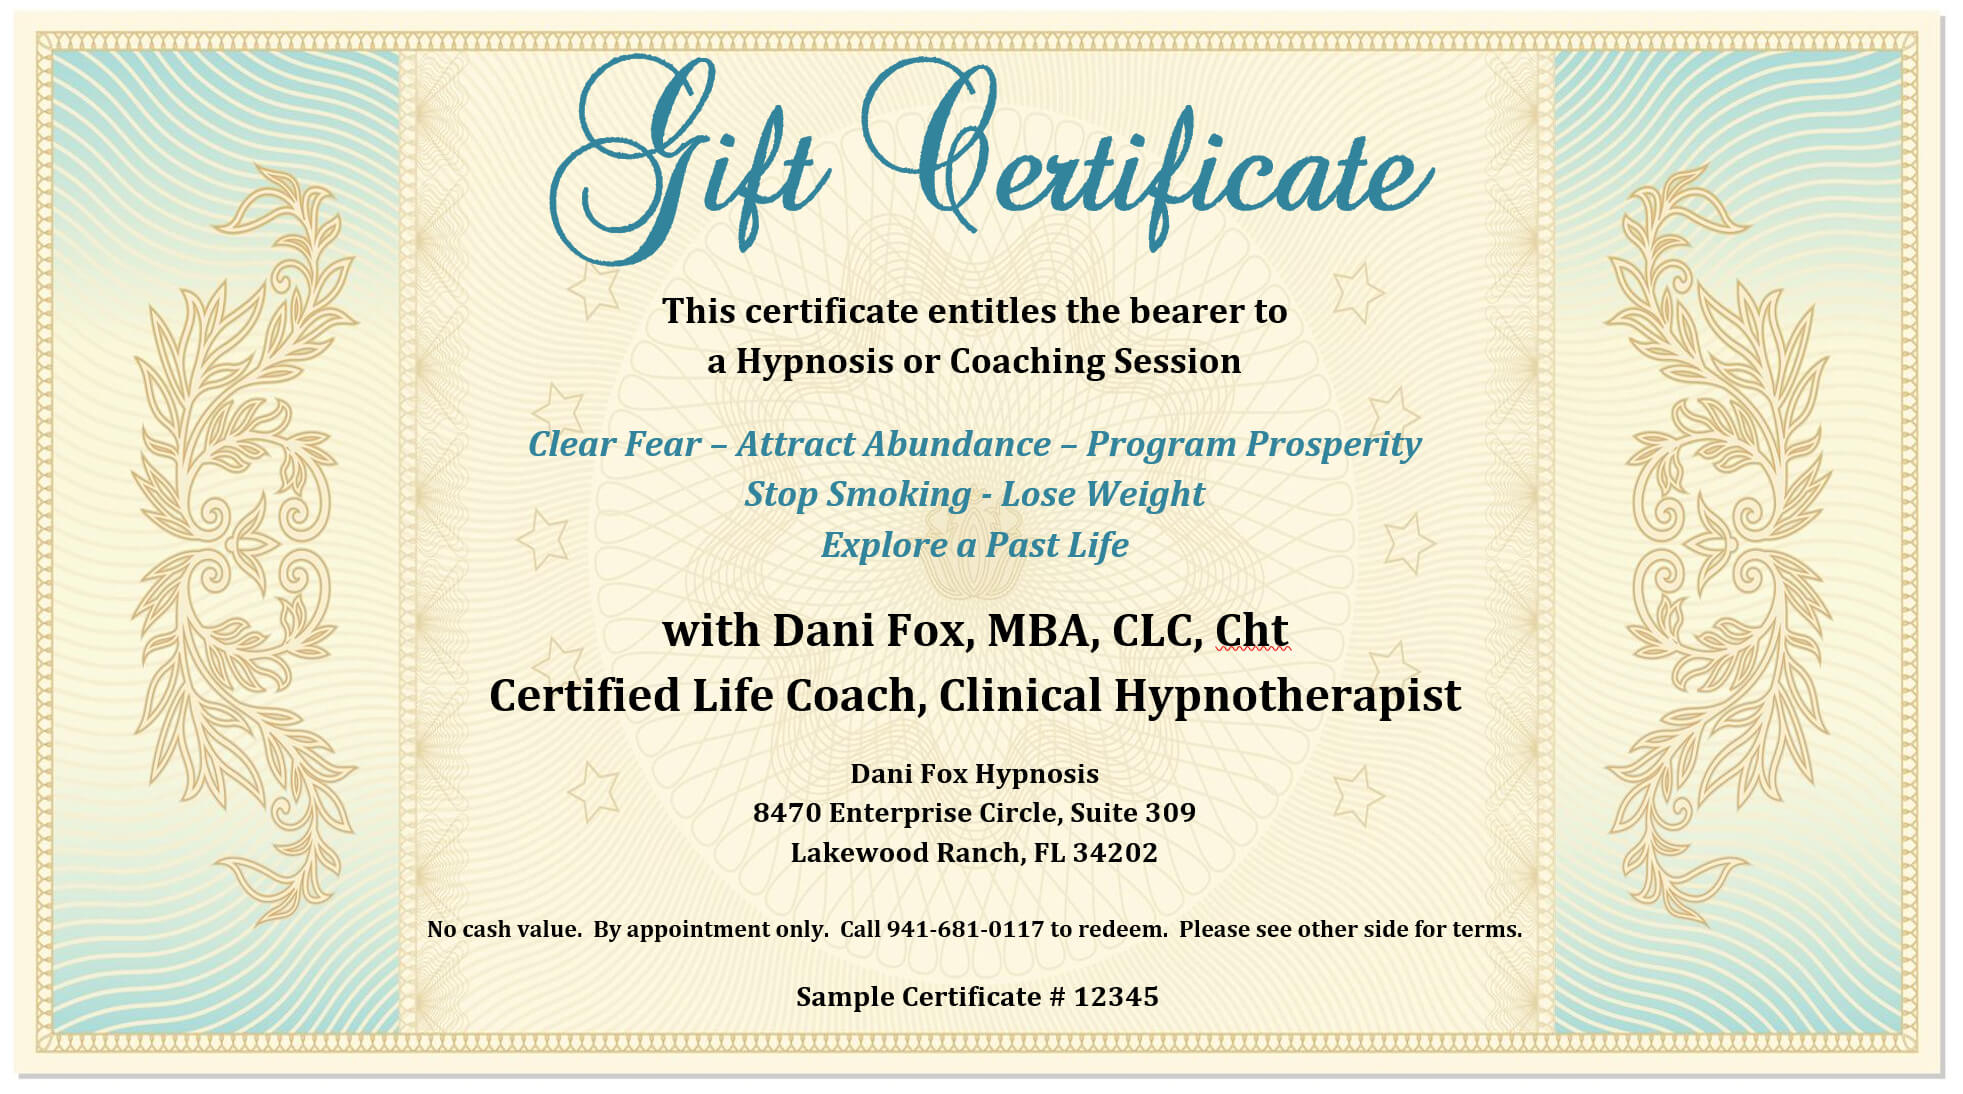 Certificate Of Gift | Certificatetemplategift With This With This Entitles The Bearer To Template Certificate